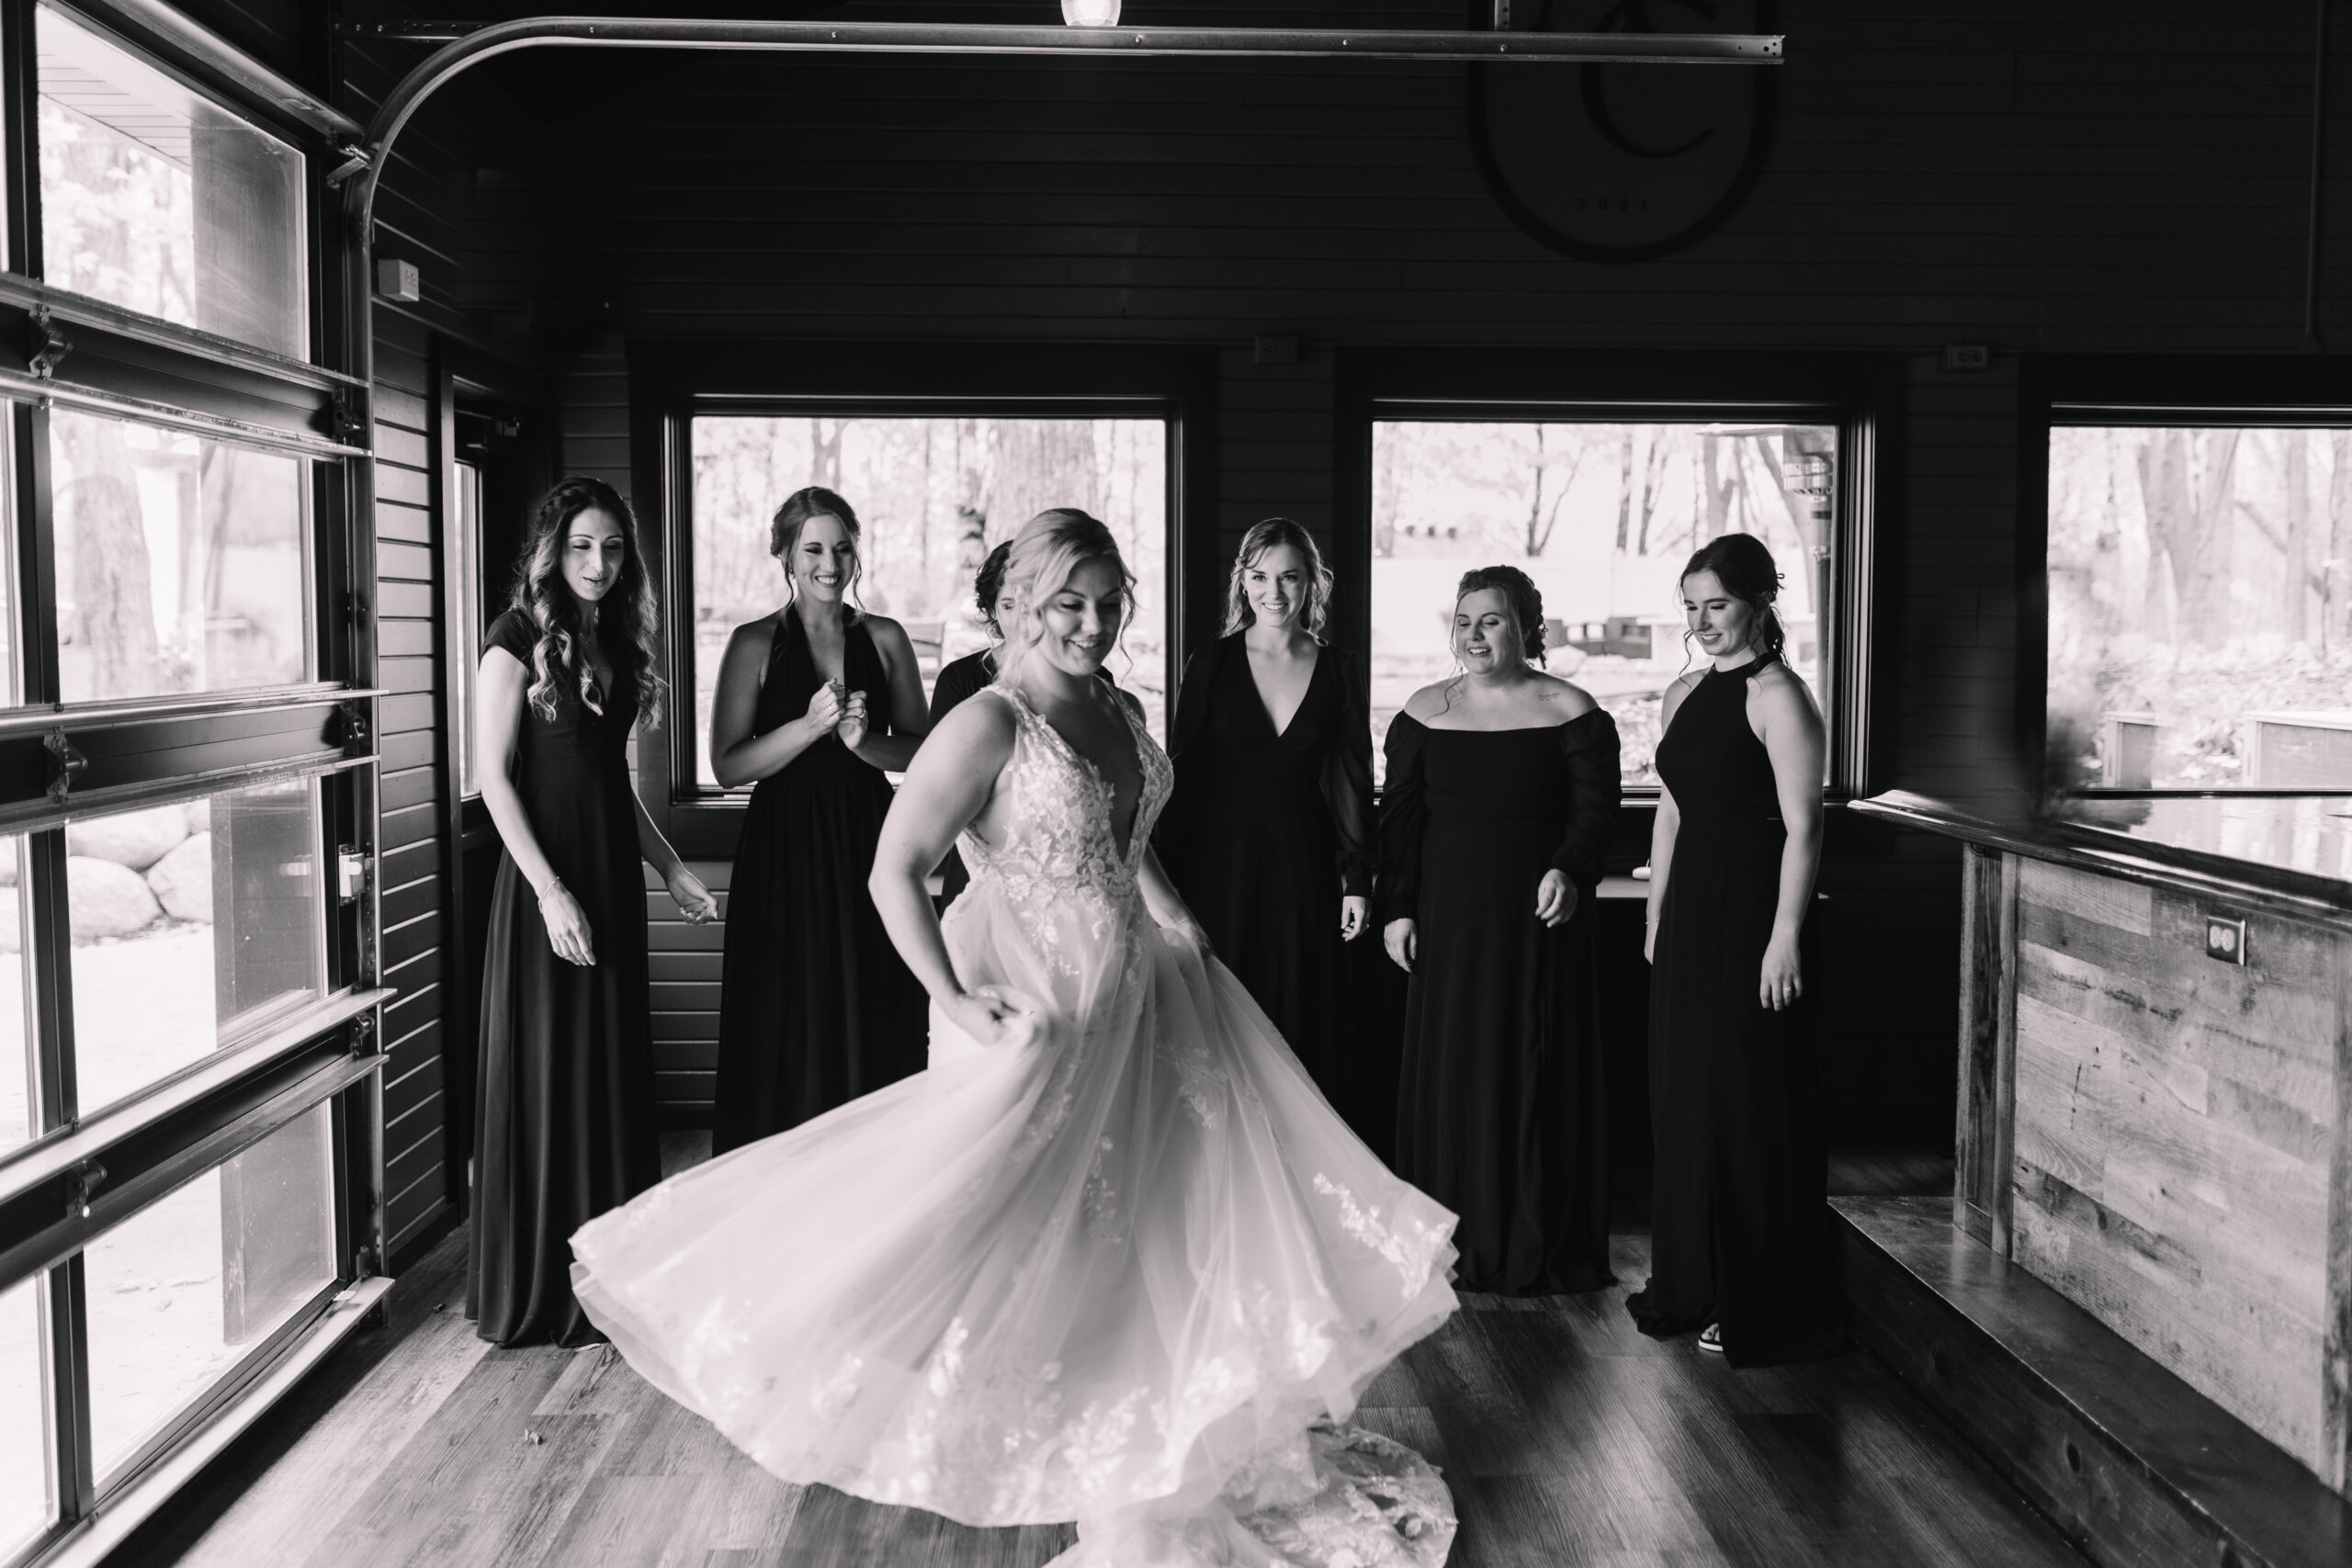 Bride twirling around in her wedding dress revealing her final look to her bridesmaids who are smiling and cheering her on